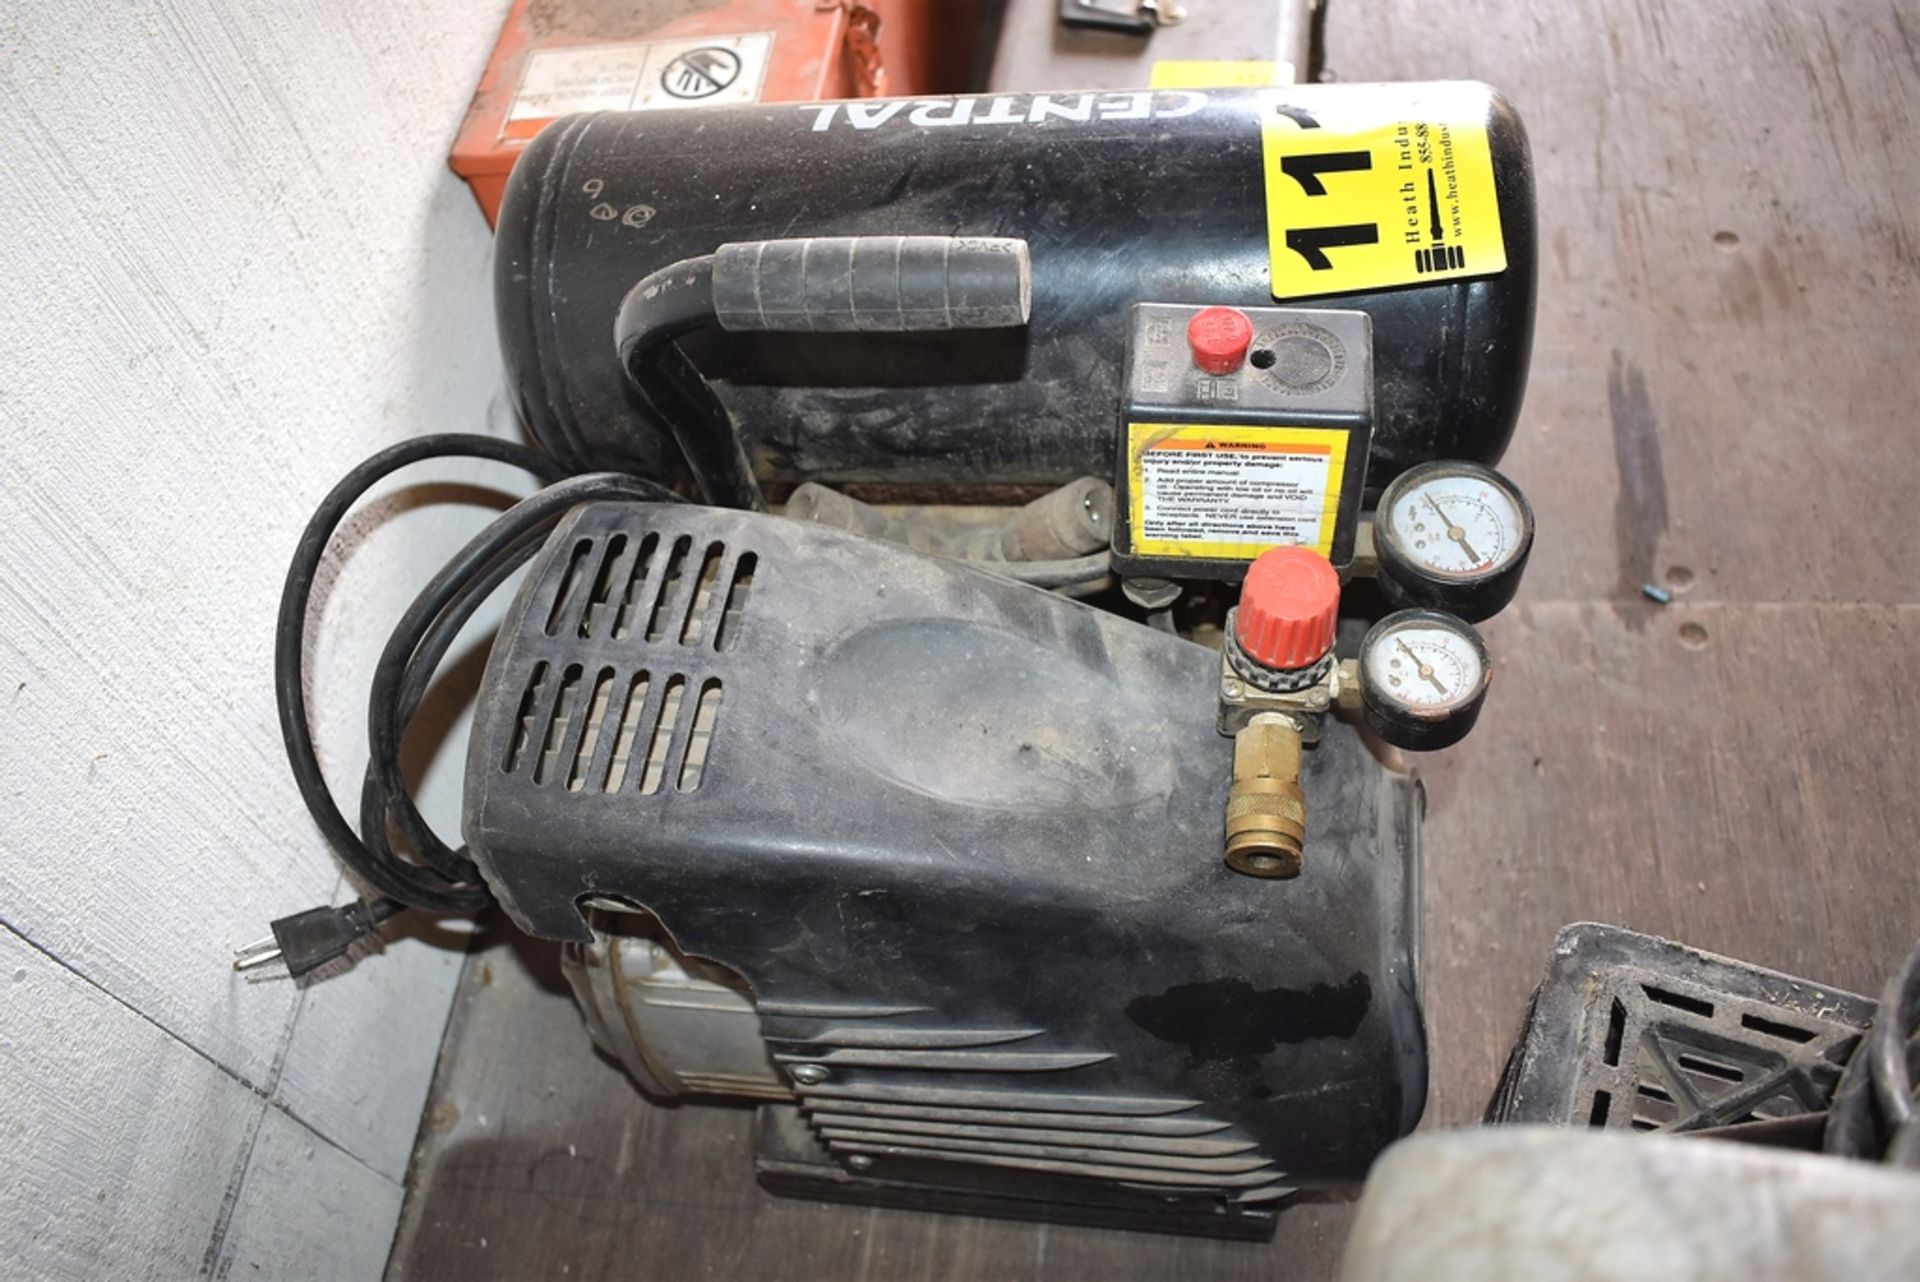 CENTRAL PNEUMATIC 2 HP MODEL 95498 TWIN TANK AIR COMPRESSOR - Image 2 of 2